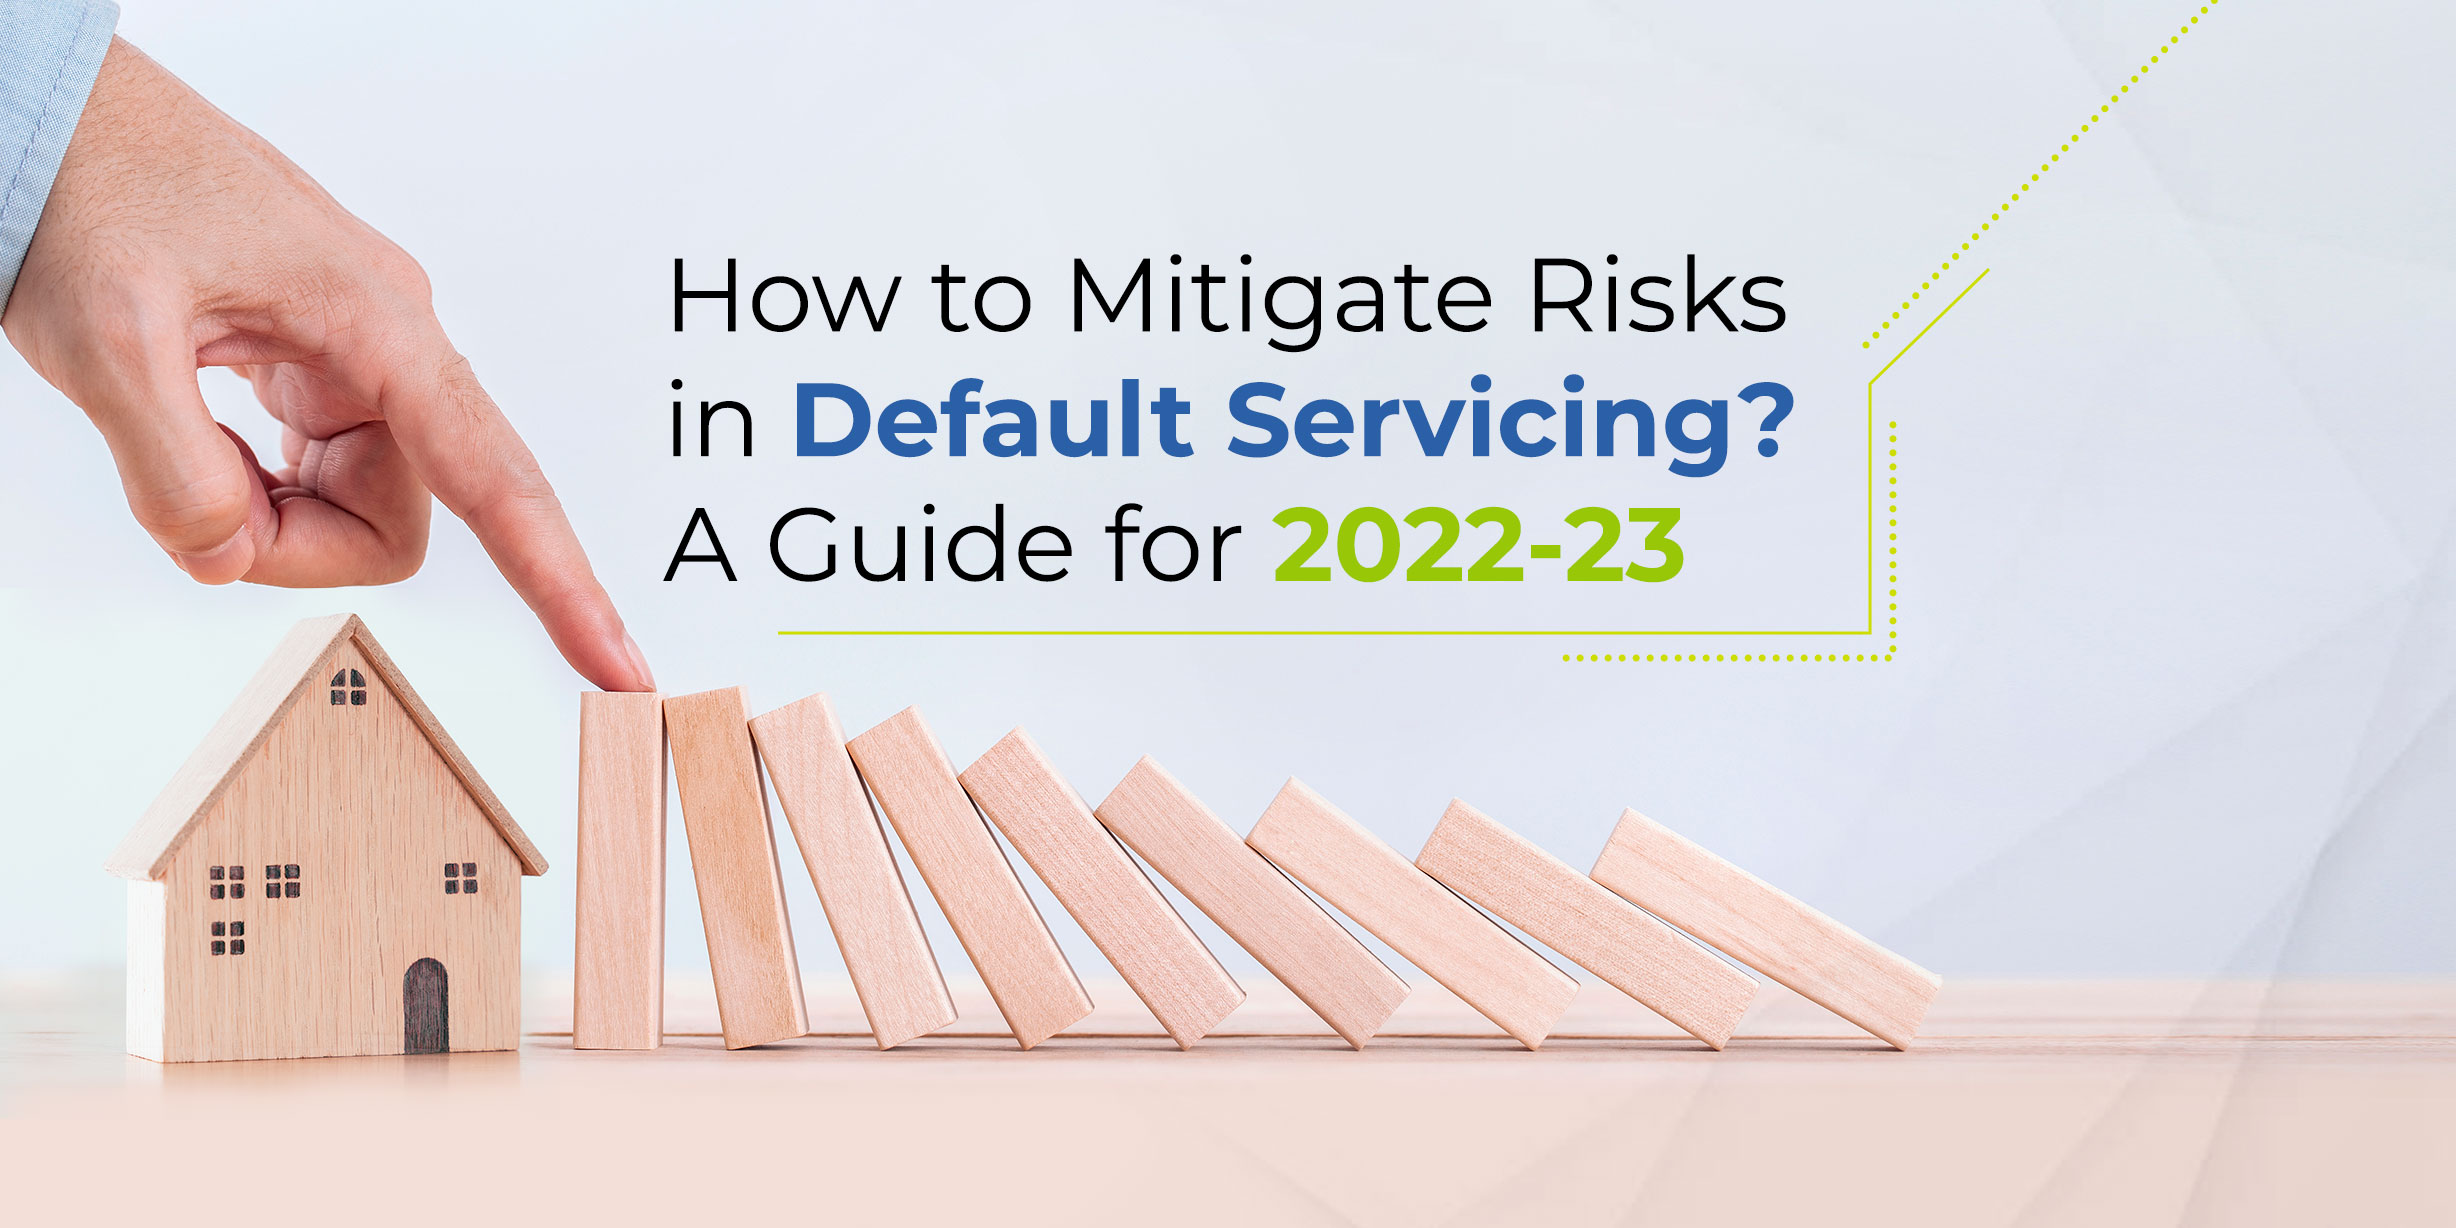 How to Mitigate Risks in Default Servicing?